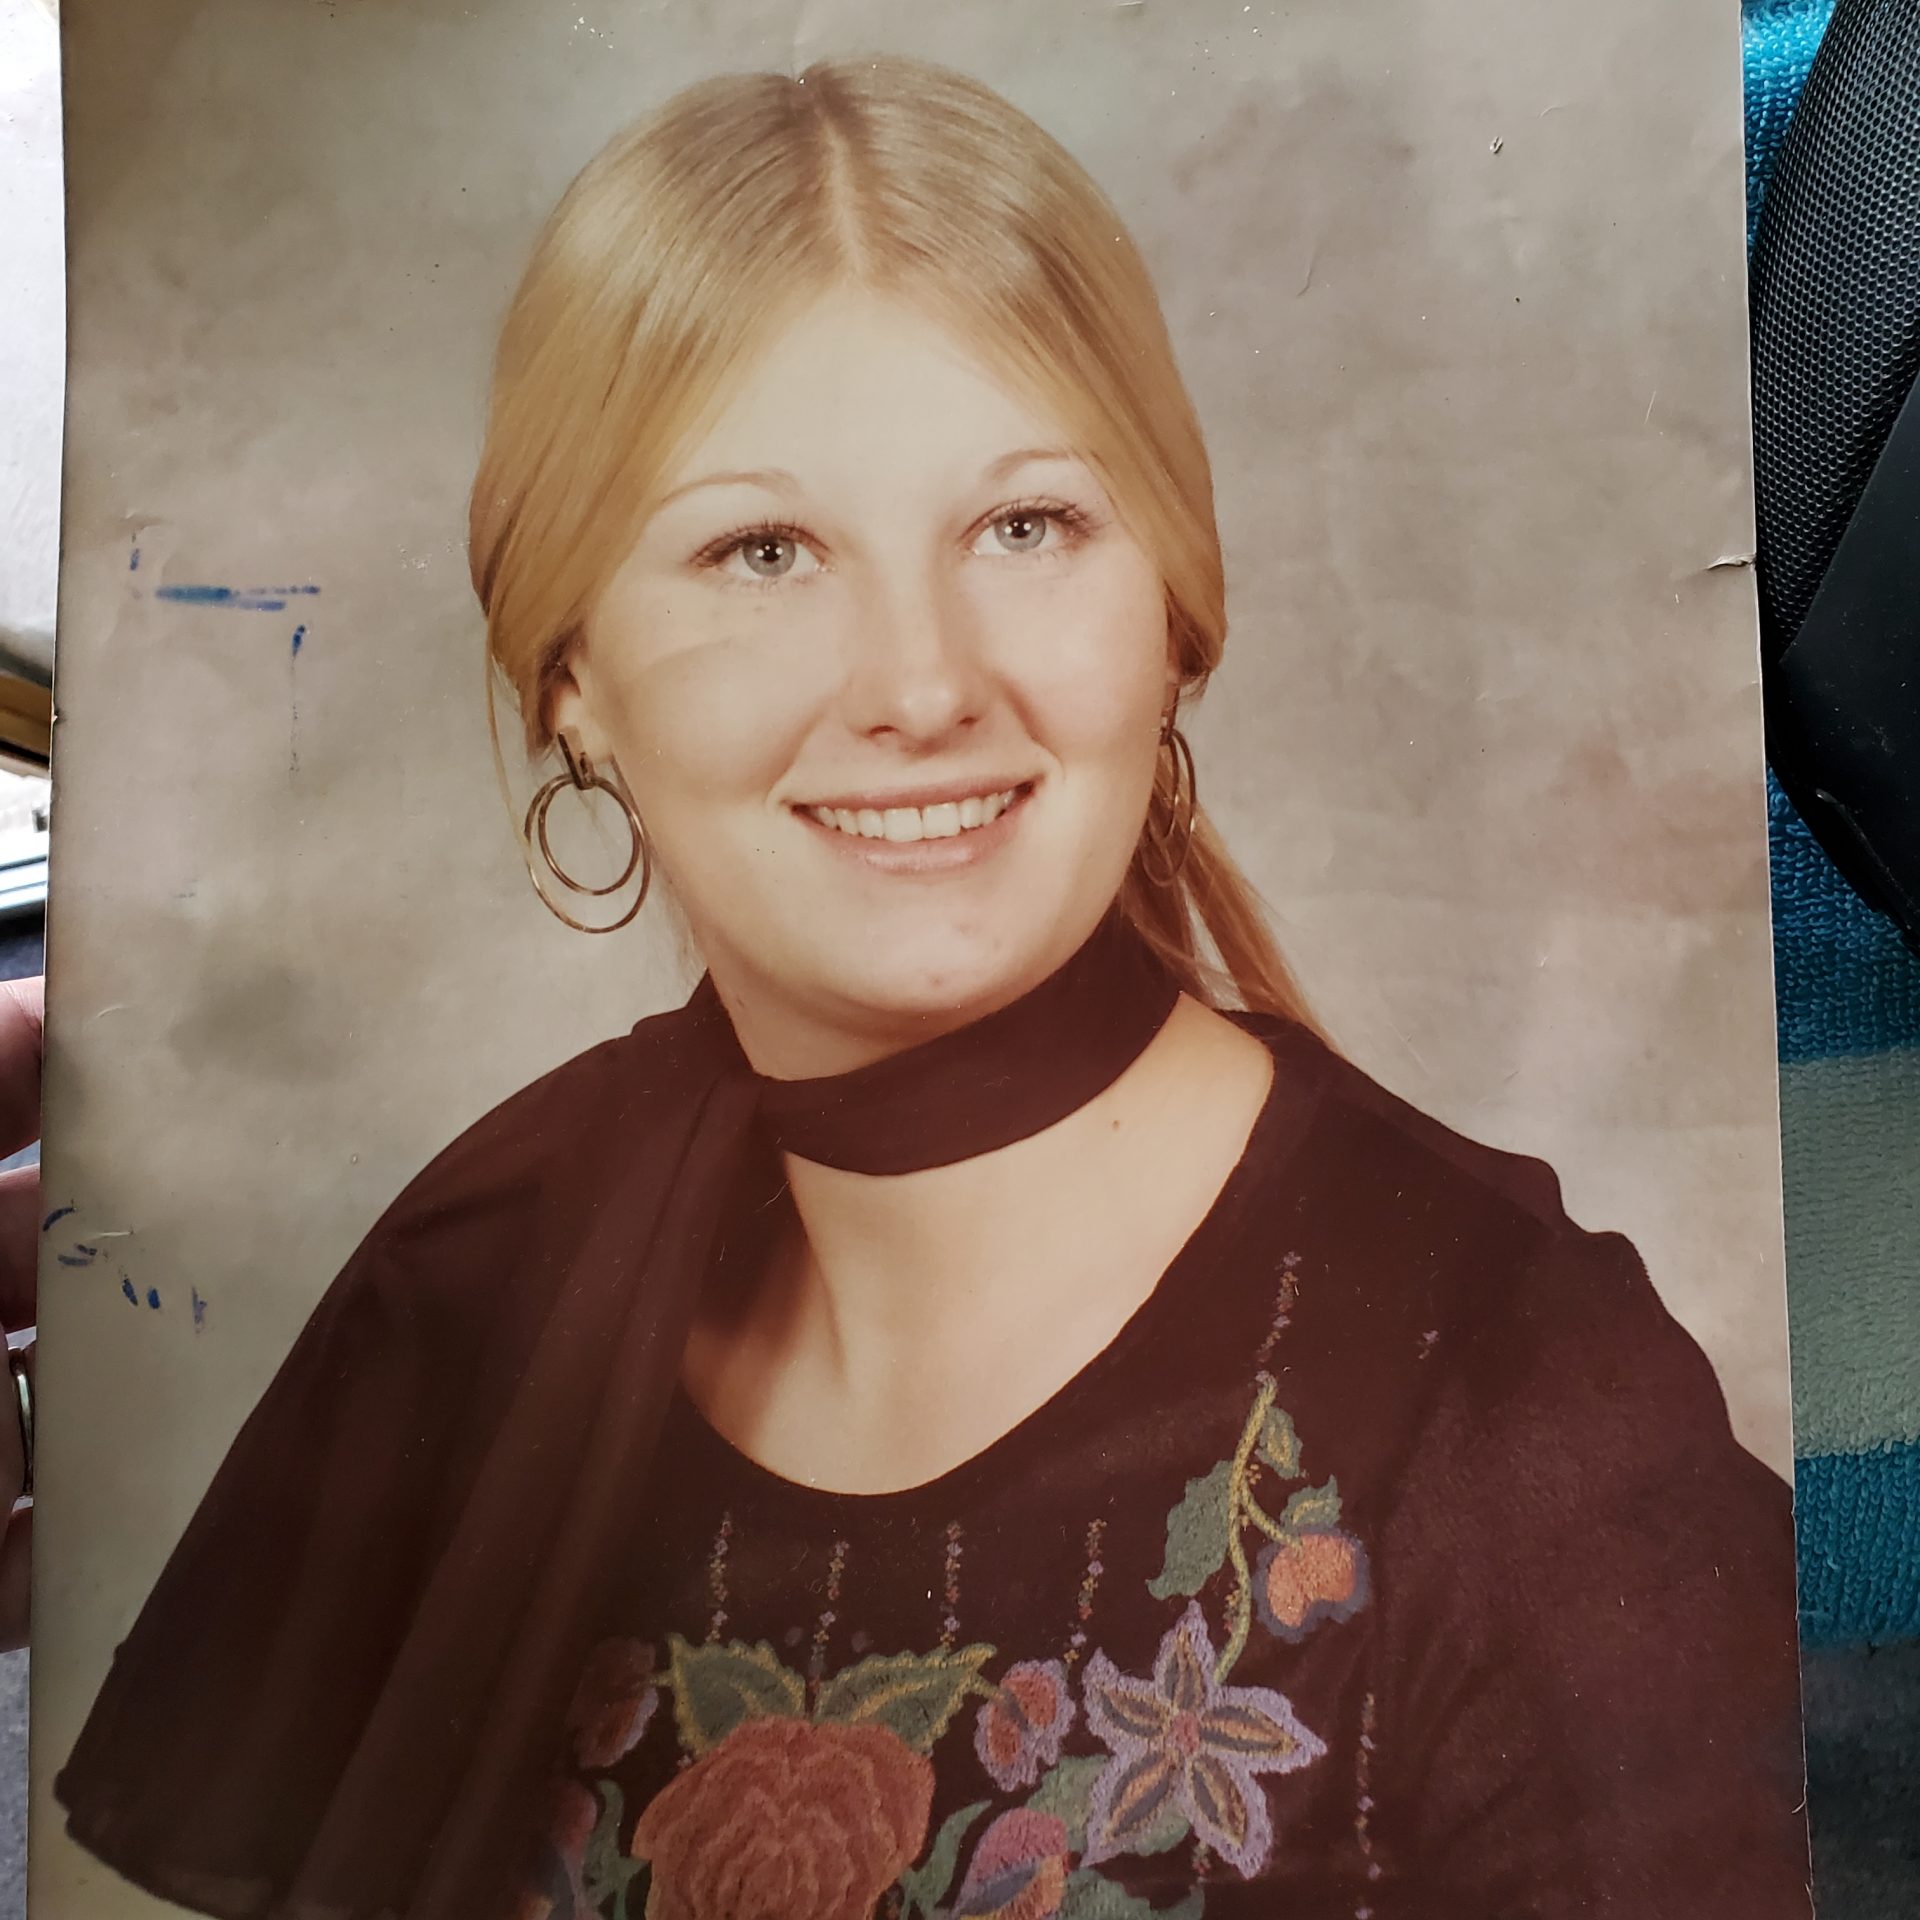 Mom back in the day.